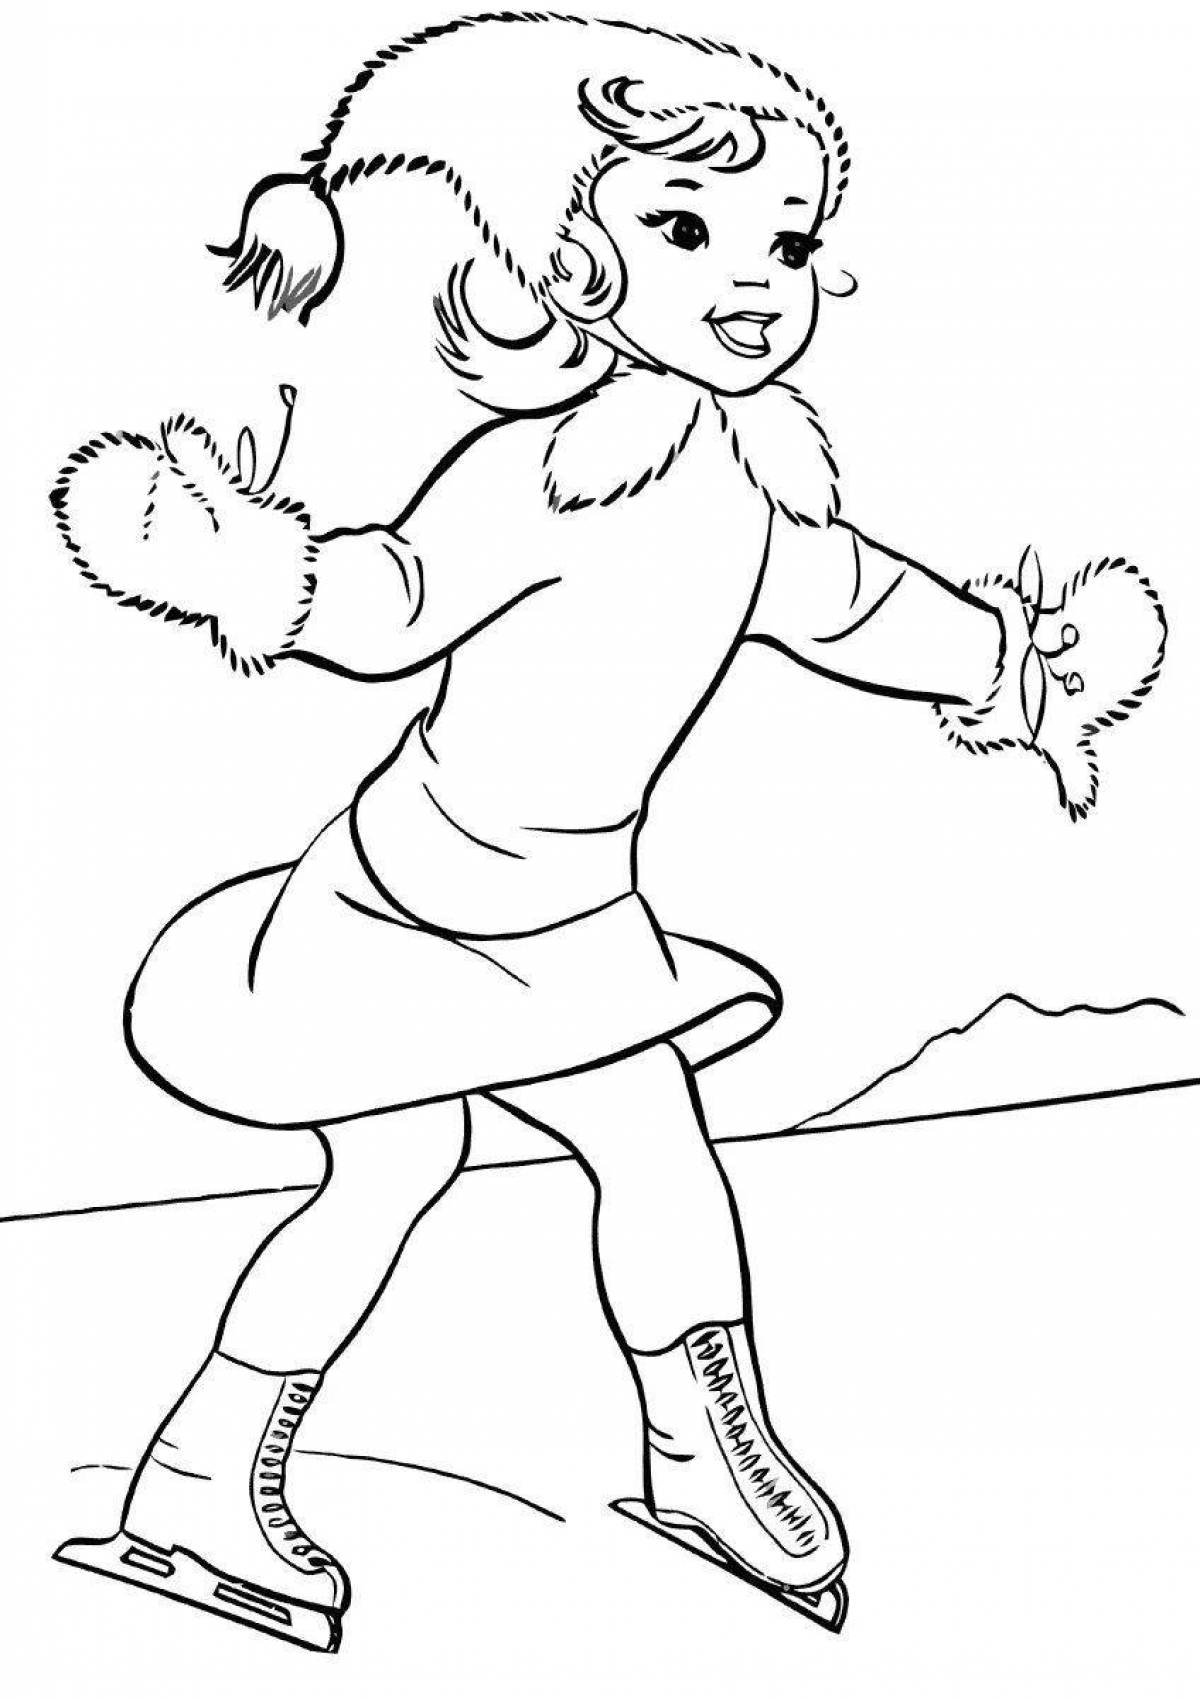 Dynamic skater coloring page for kids